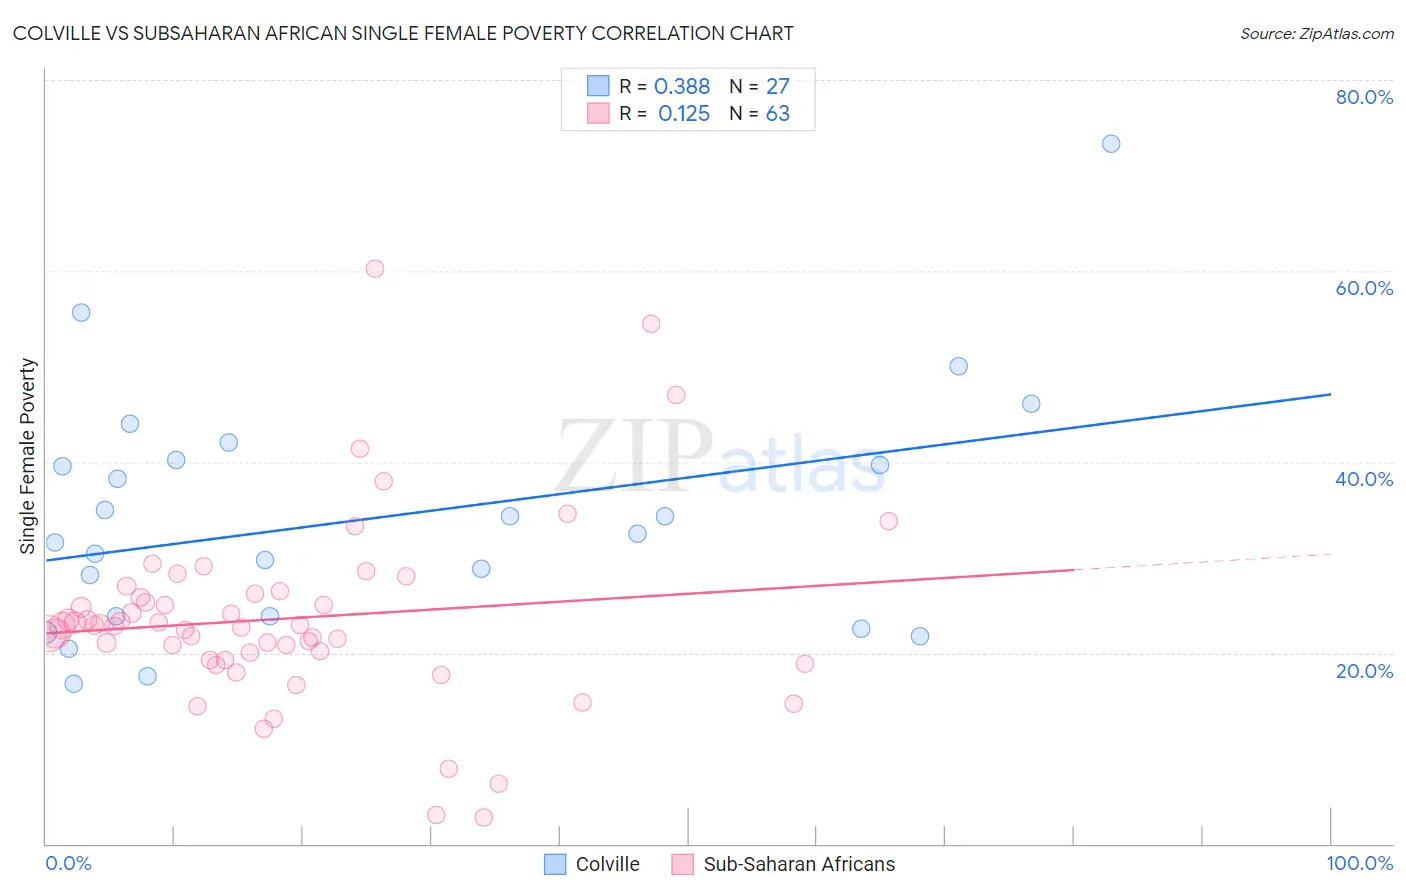 Colville vs Subsaharan African Single Female Poverty